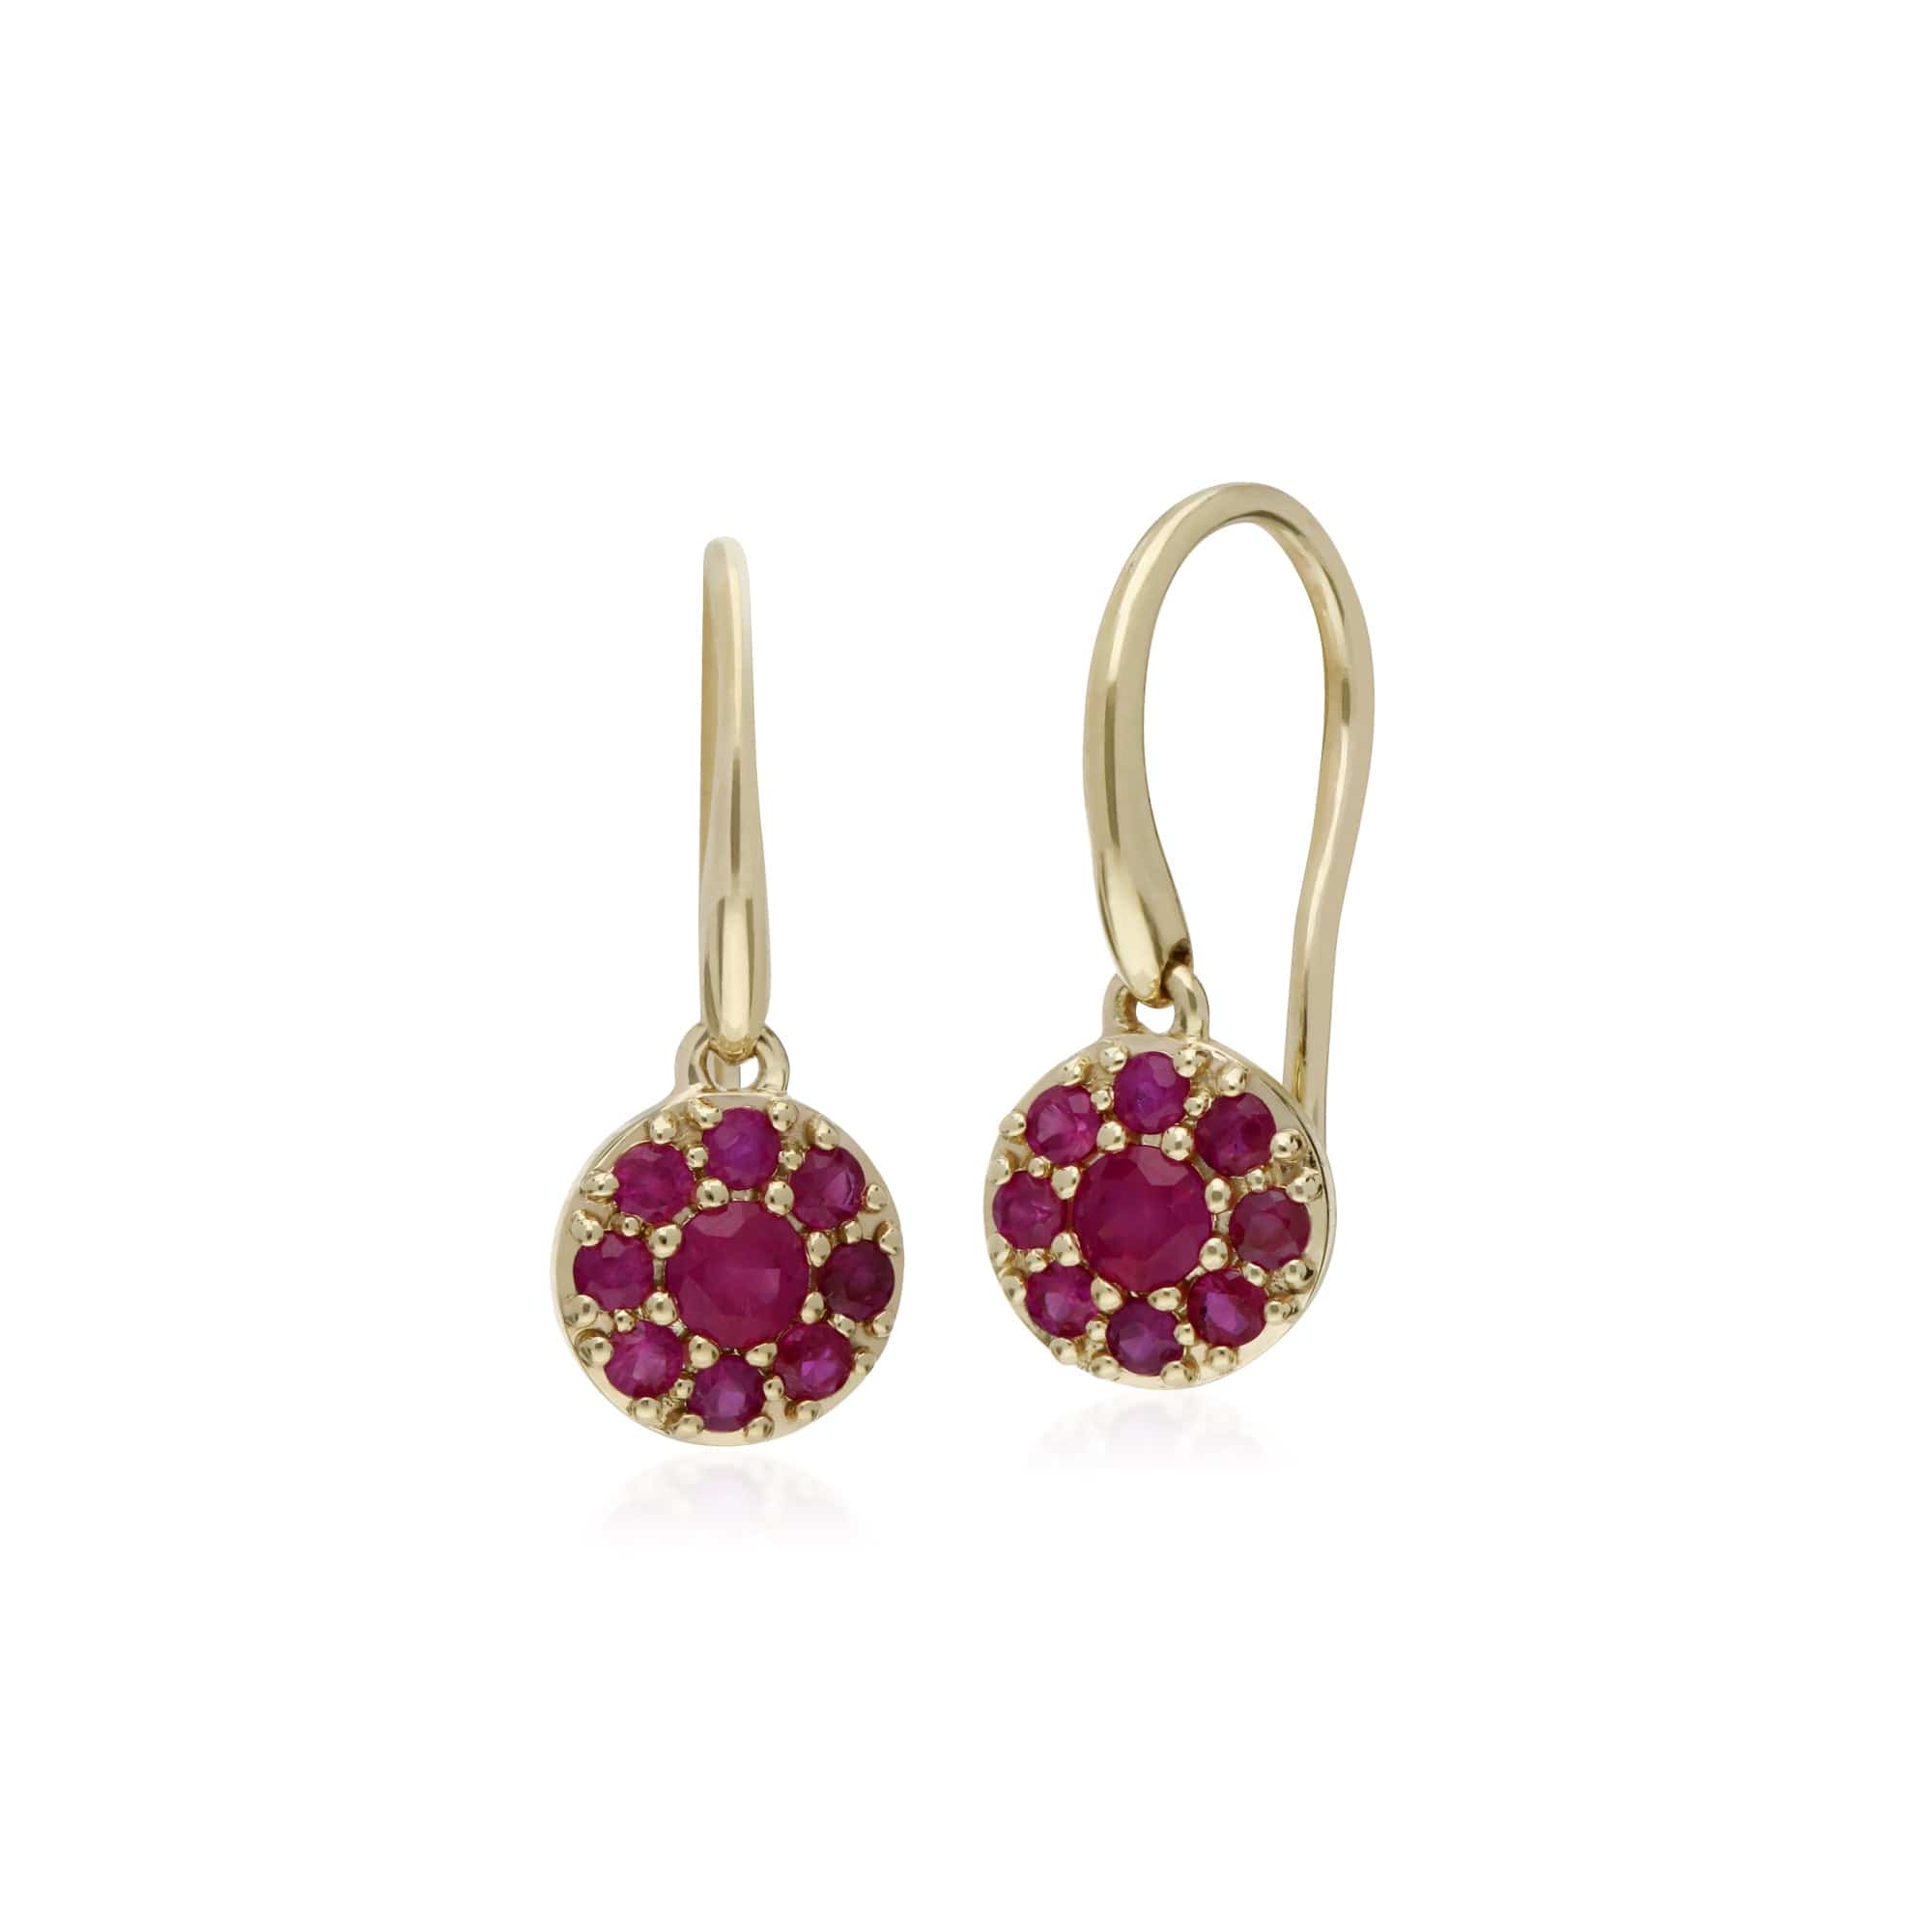 Cluster Round Ruby Circle Fish Hook Drop Earrings in 9ct Yellow Gold - Gemondo